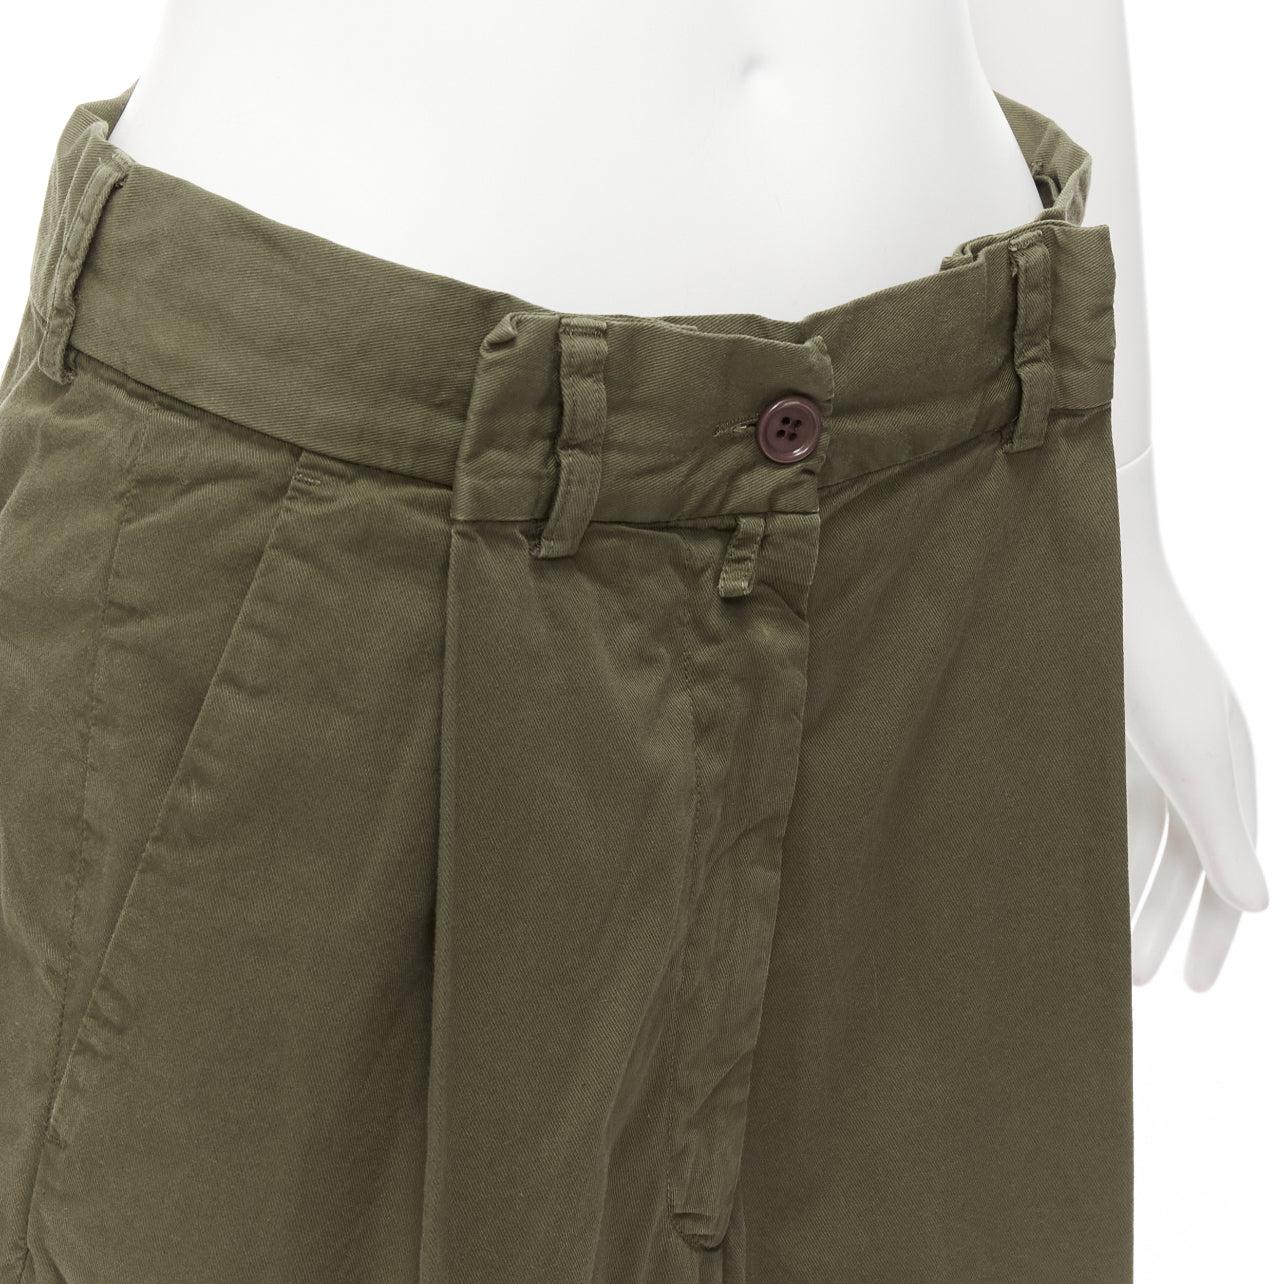 DRIES VAN NOTEN khaki 100% cotton front pleat wide leg pants FR38 M
Reference: DYTG/A00067
Brand: Dries Van Noten
Material: Cotton
Color: Khaki
Pattern: Solid
Closure: Zip Fly
Extra Details: Back pockets.
Made in: Romania

CONDITION:
Condition: Very